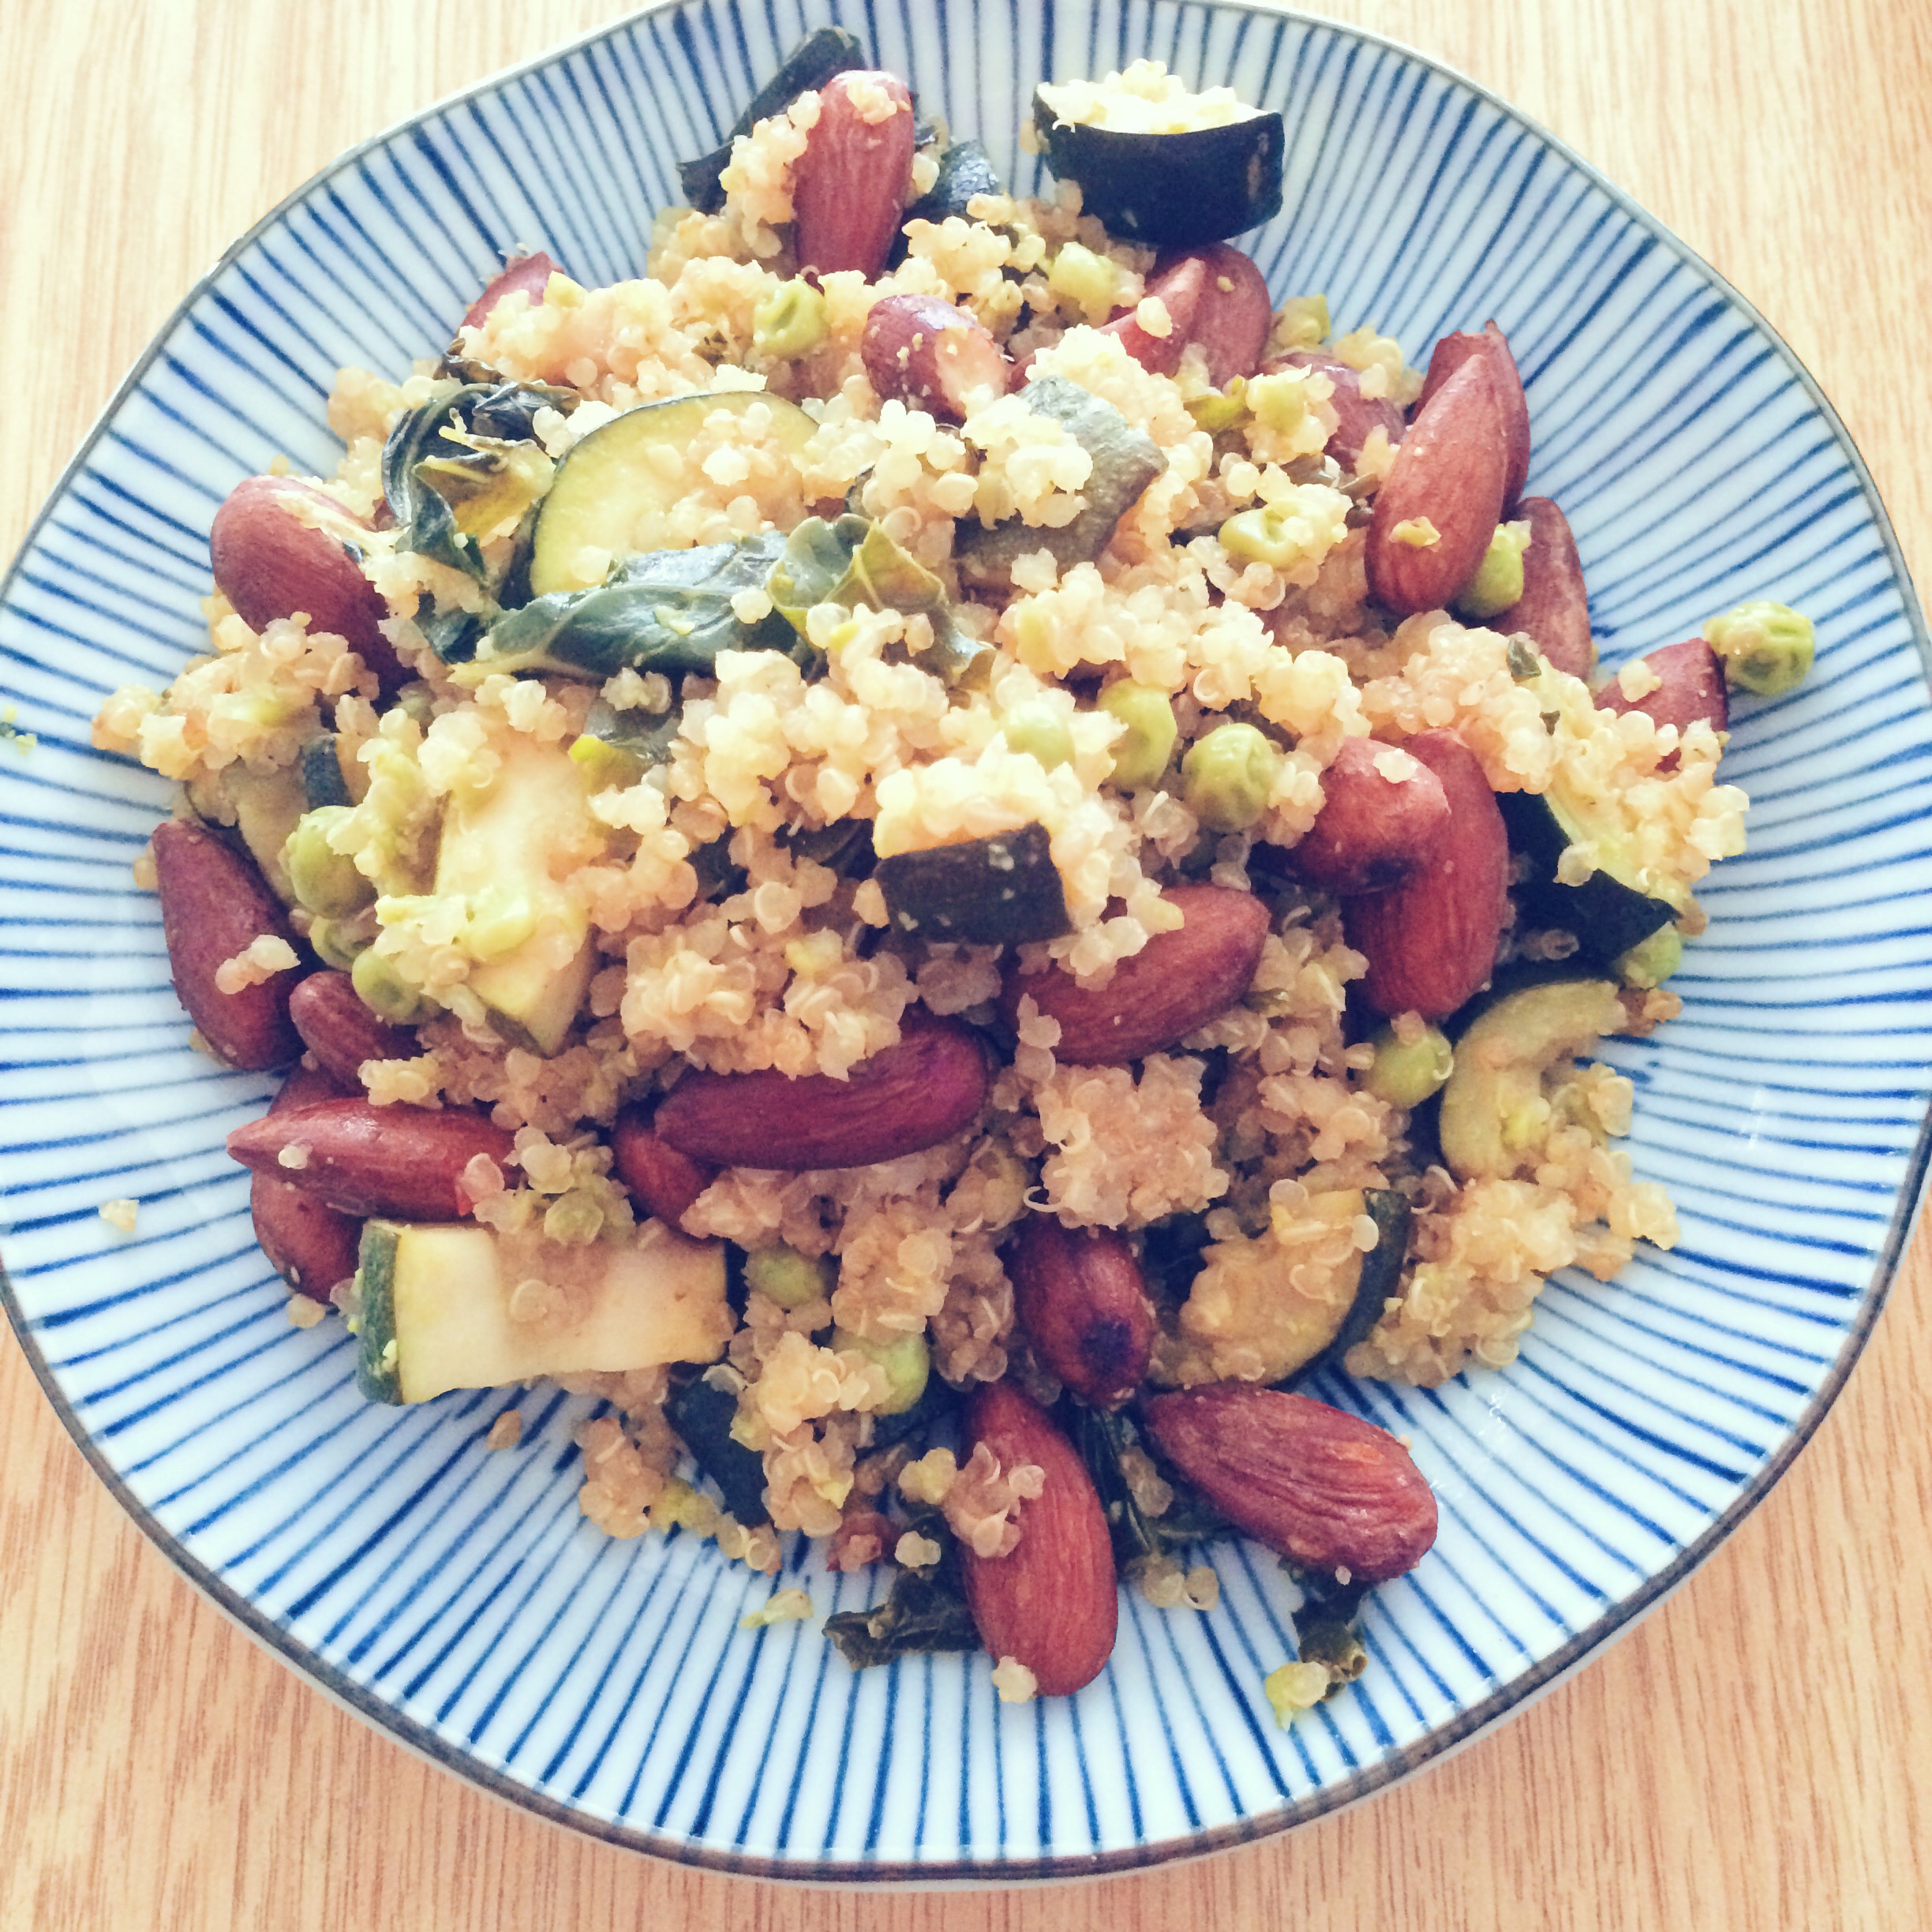 Review of the Deliciously Ella Nutty Pea and Quinoa Bowl